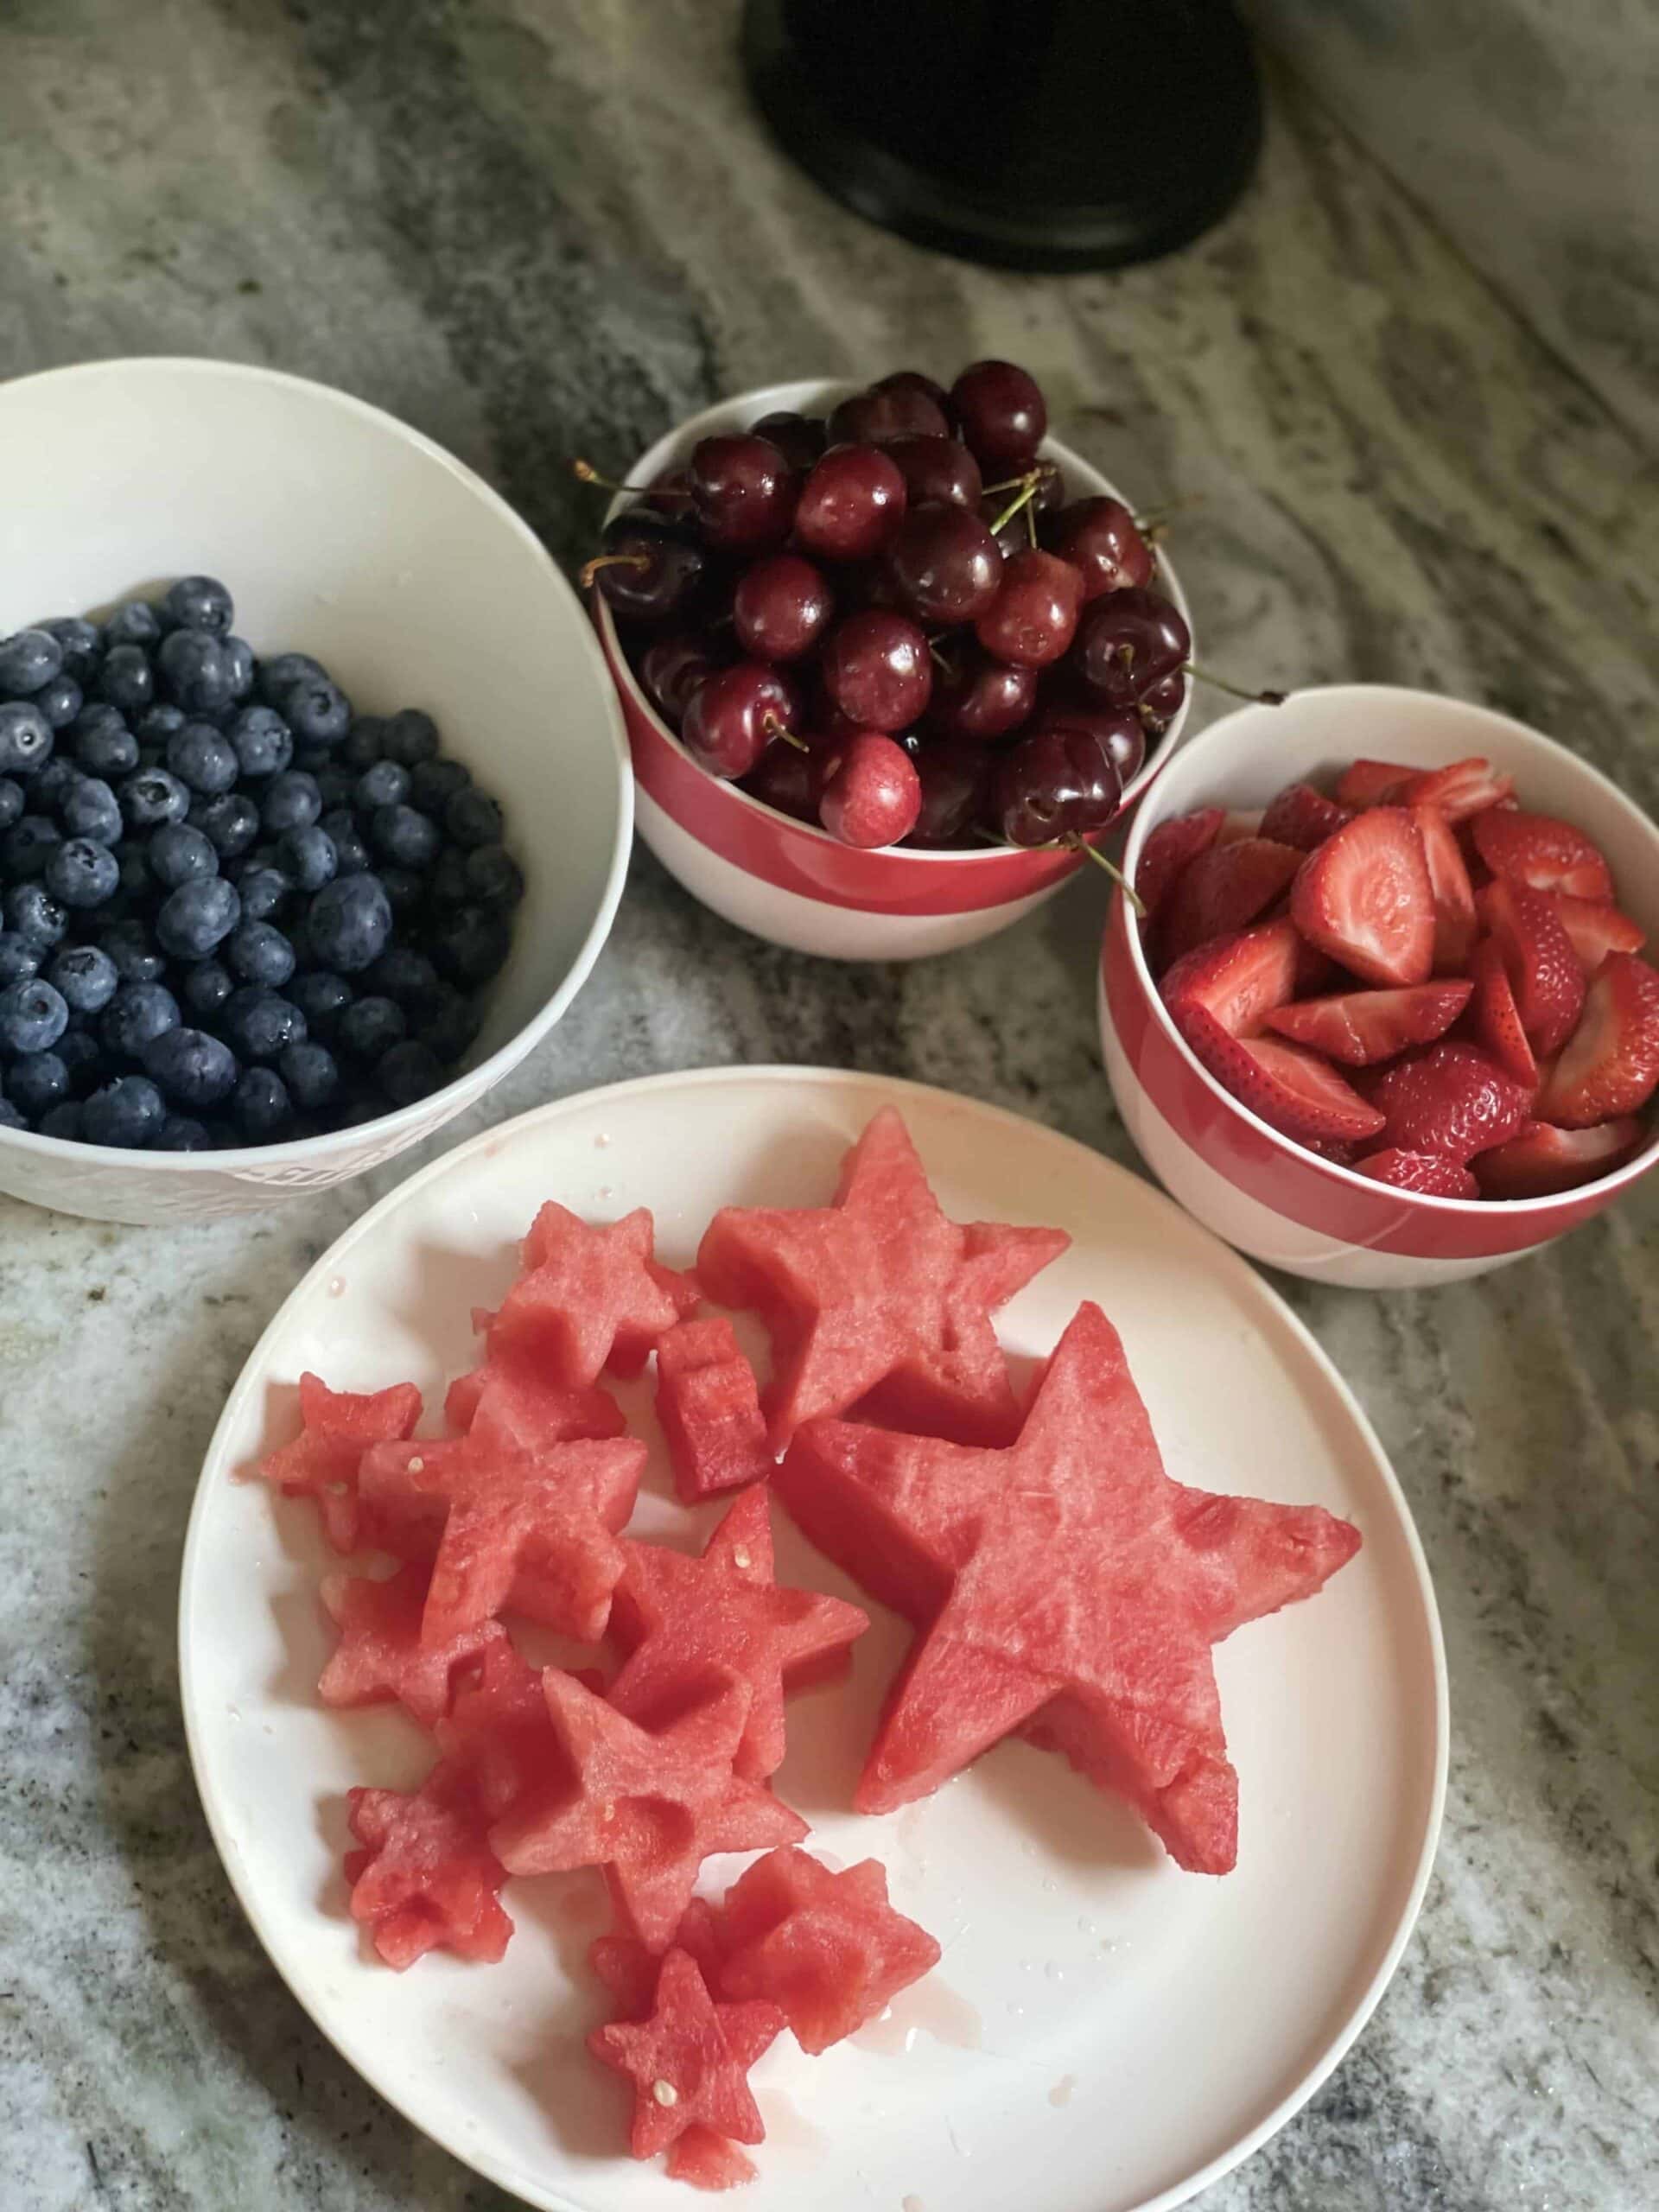 Fruit tray for the 4th of July